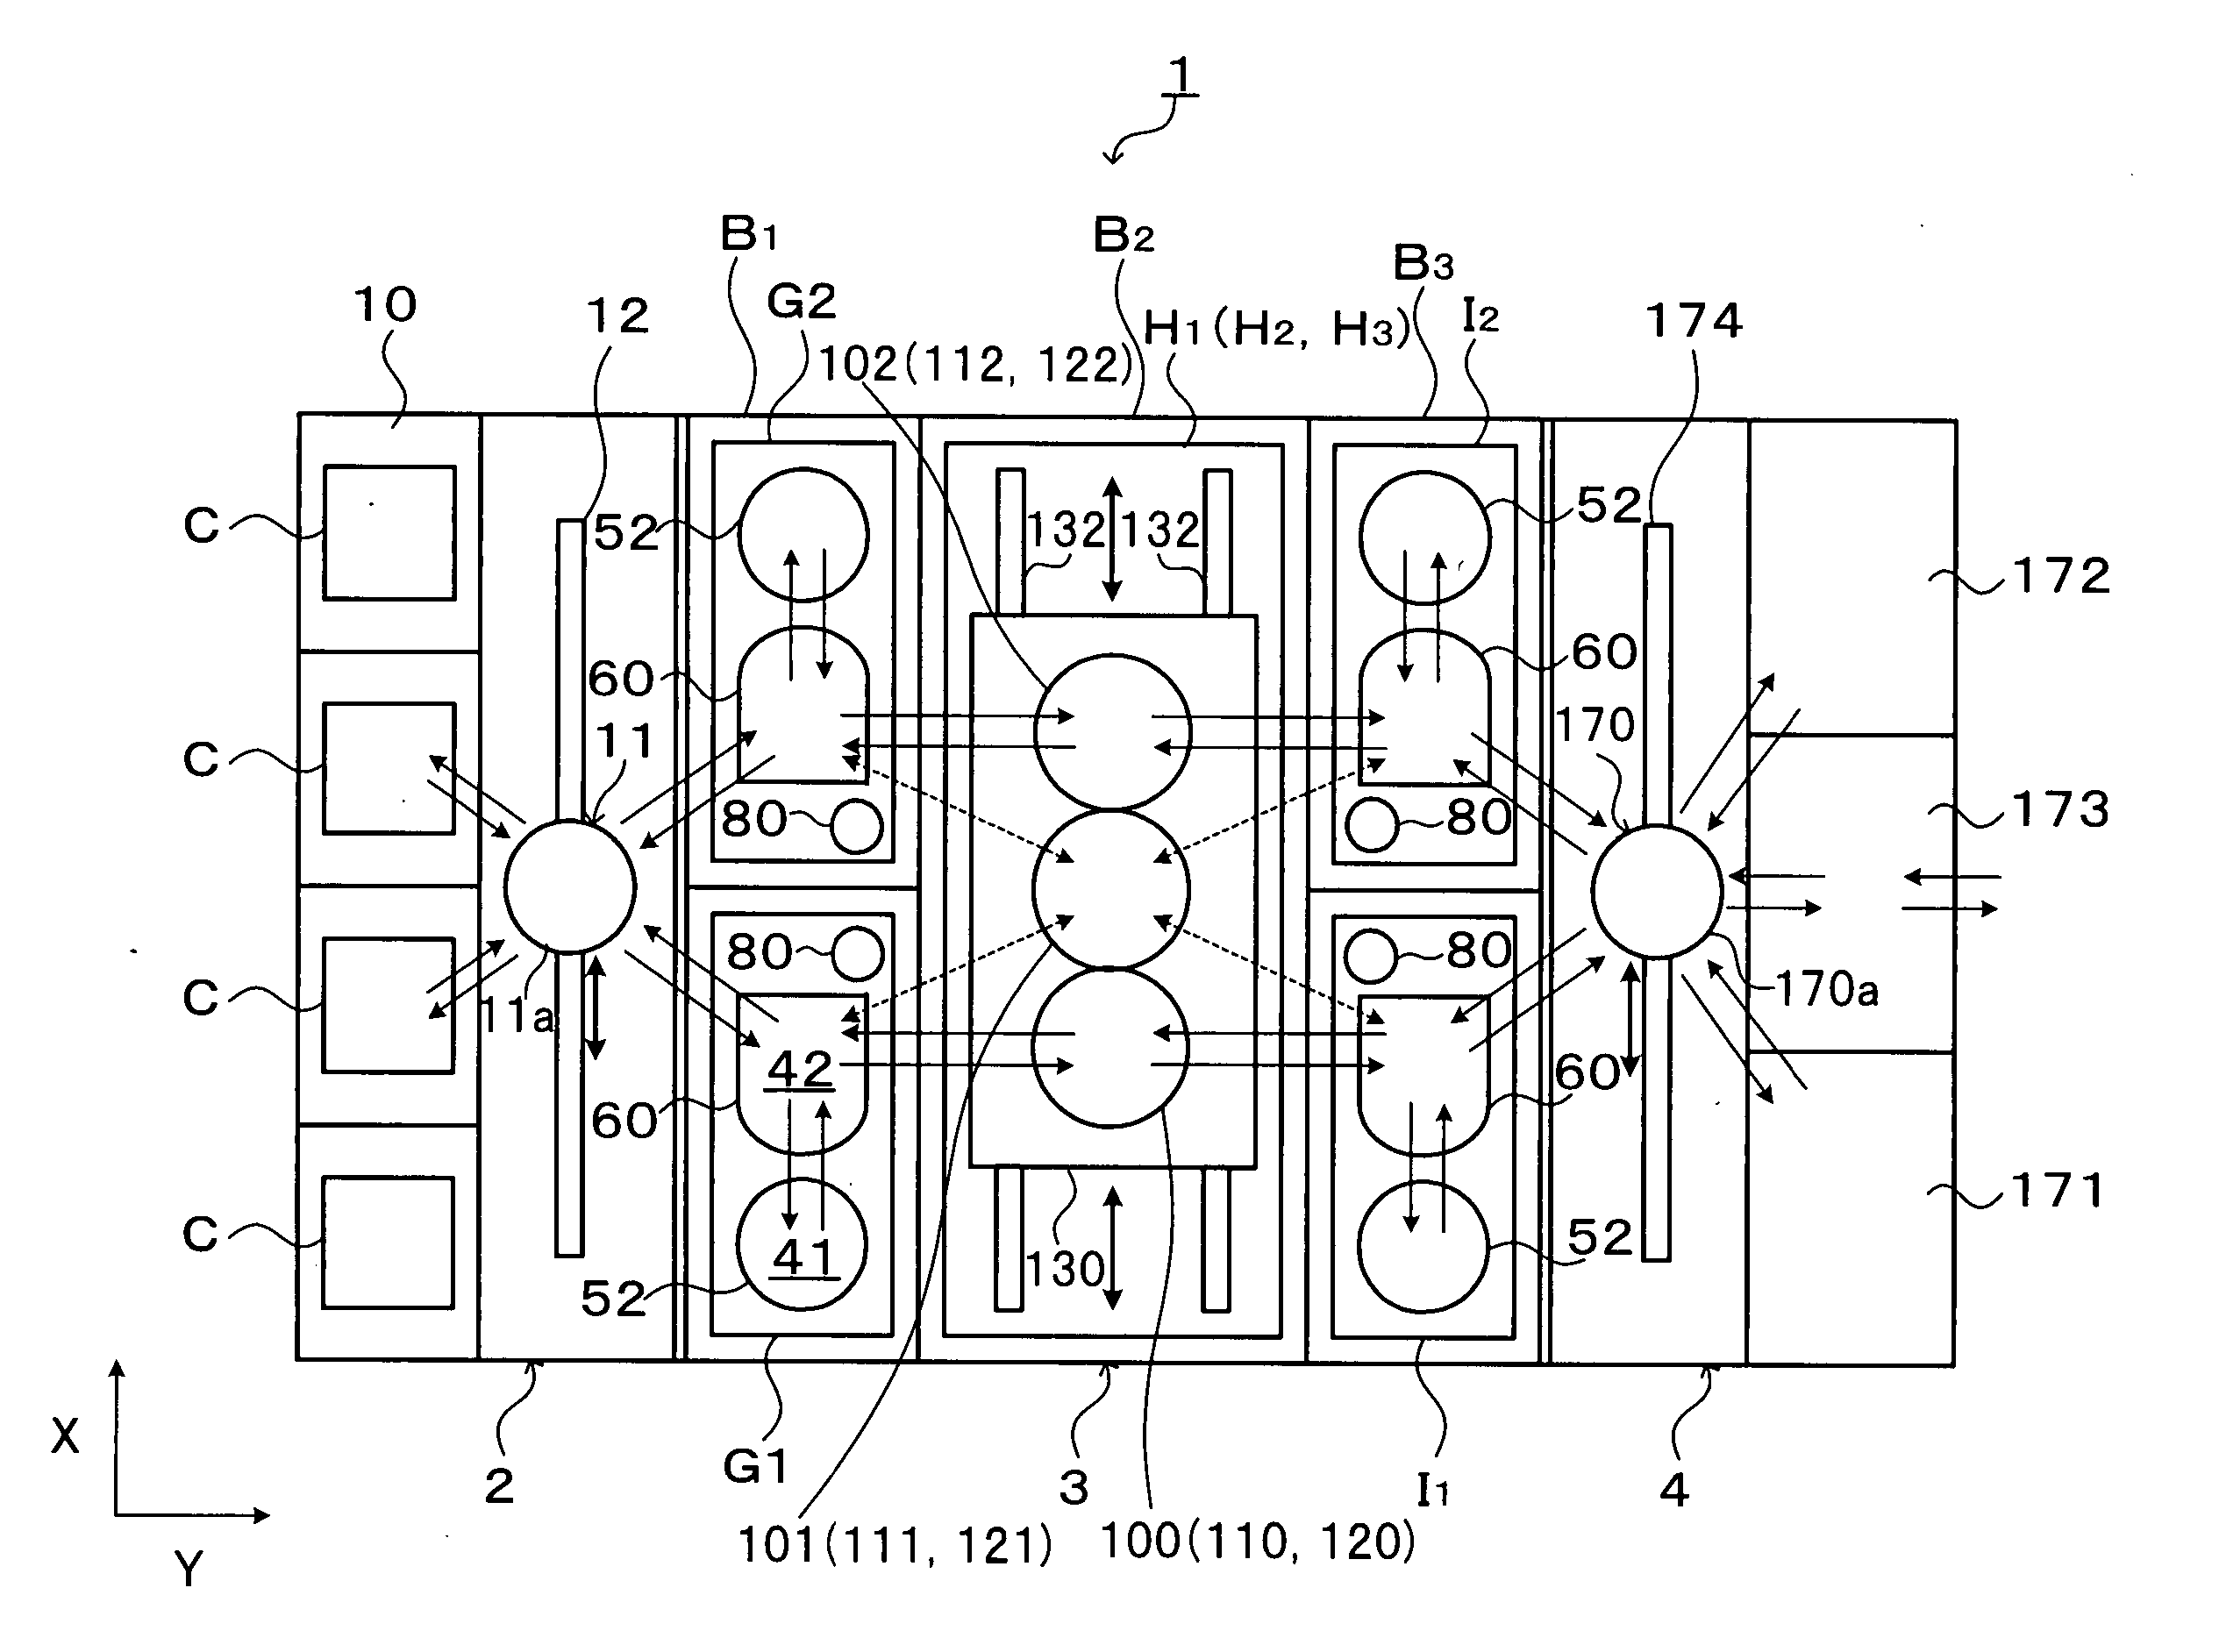 Substrate processing system